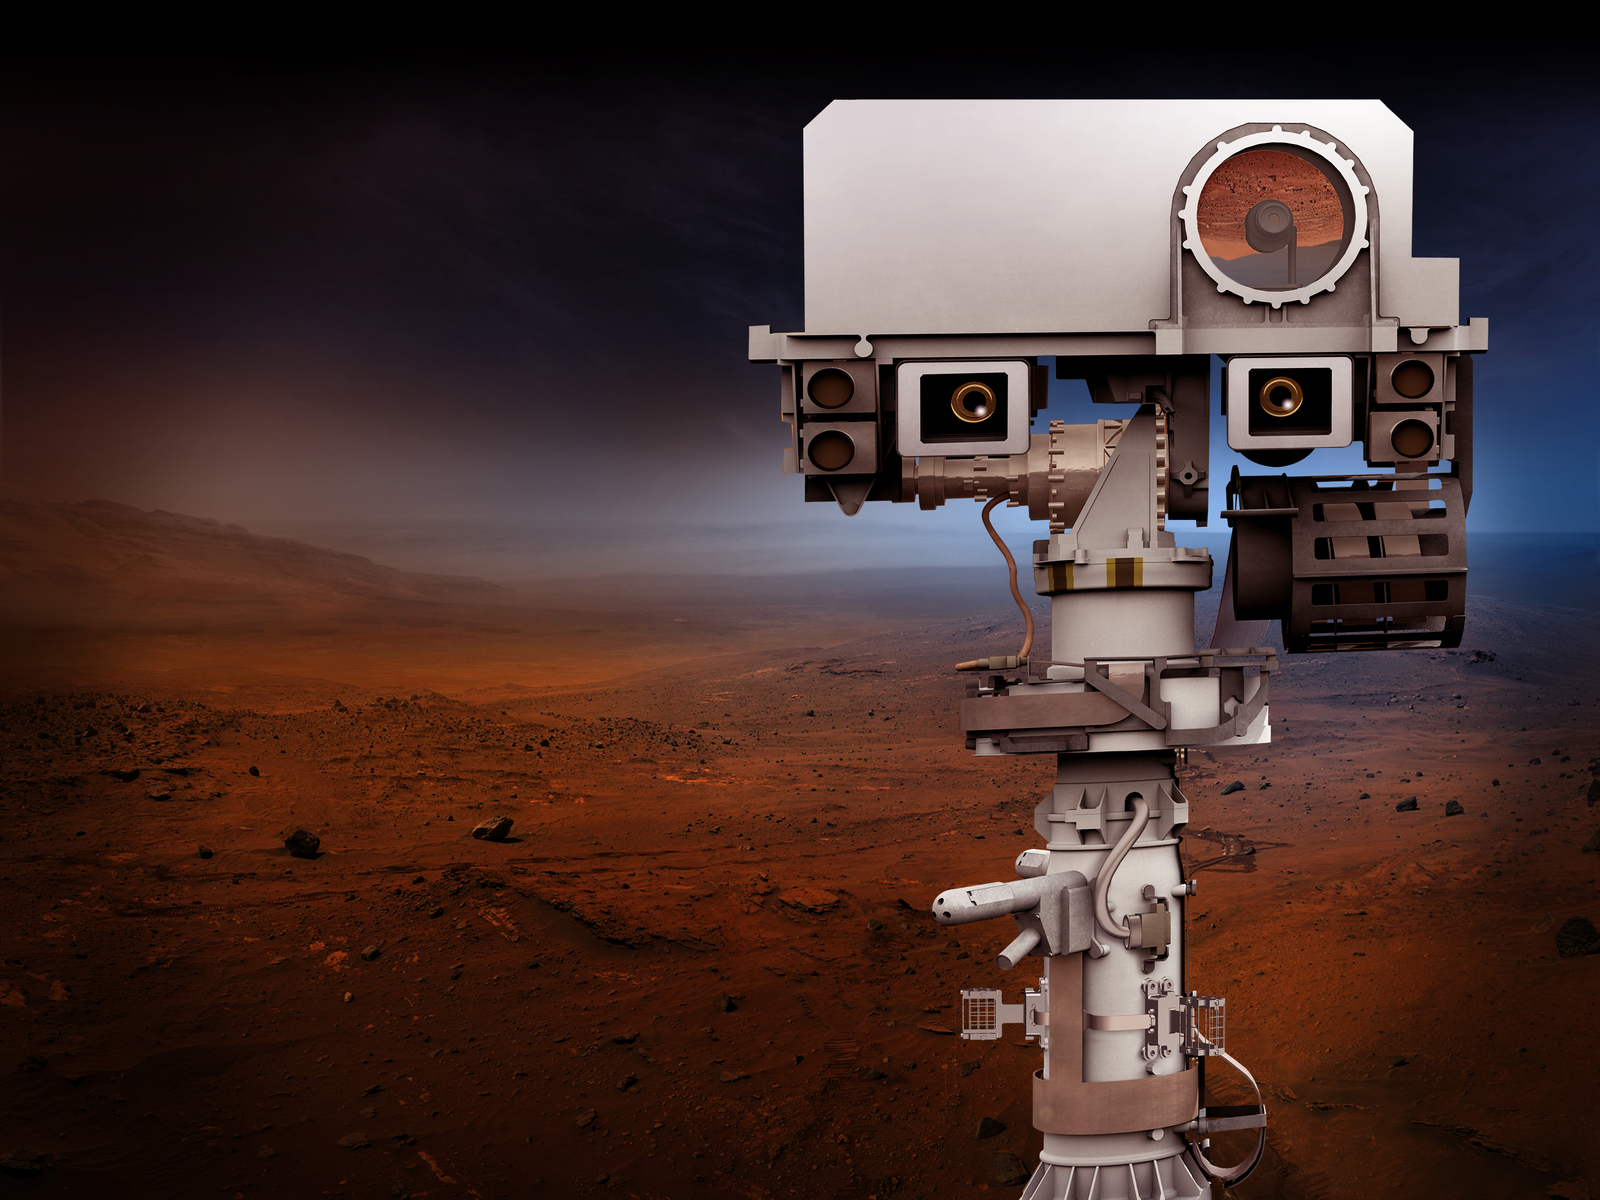 NASA's Mars 2020 Project will re-use the basic engineering of NASA's Mars Science Laboratory/Curiosity to send a different rover to Mars, with new objectives and instruments. This view depicts the top of the 2020 rover's mast.